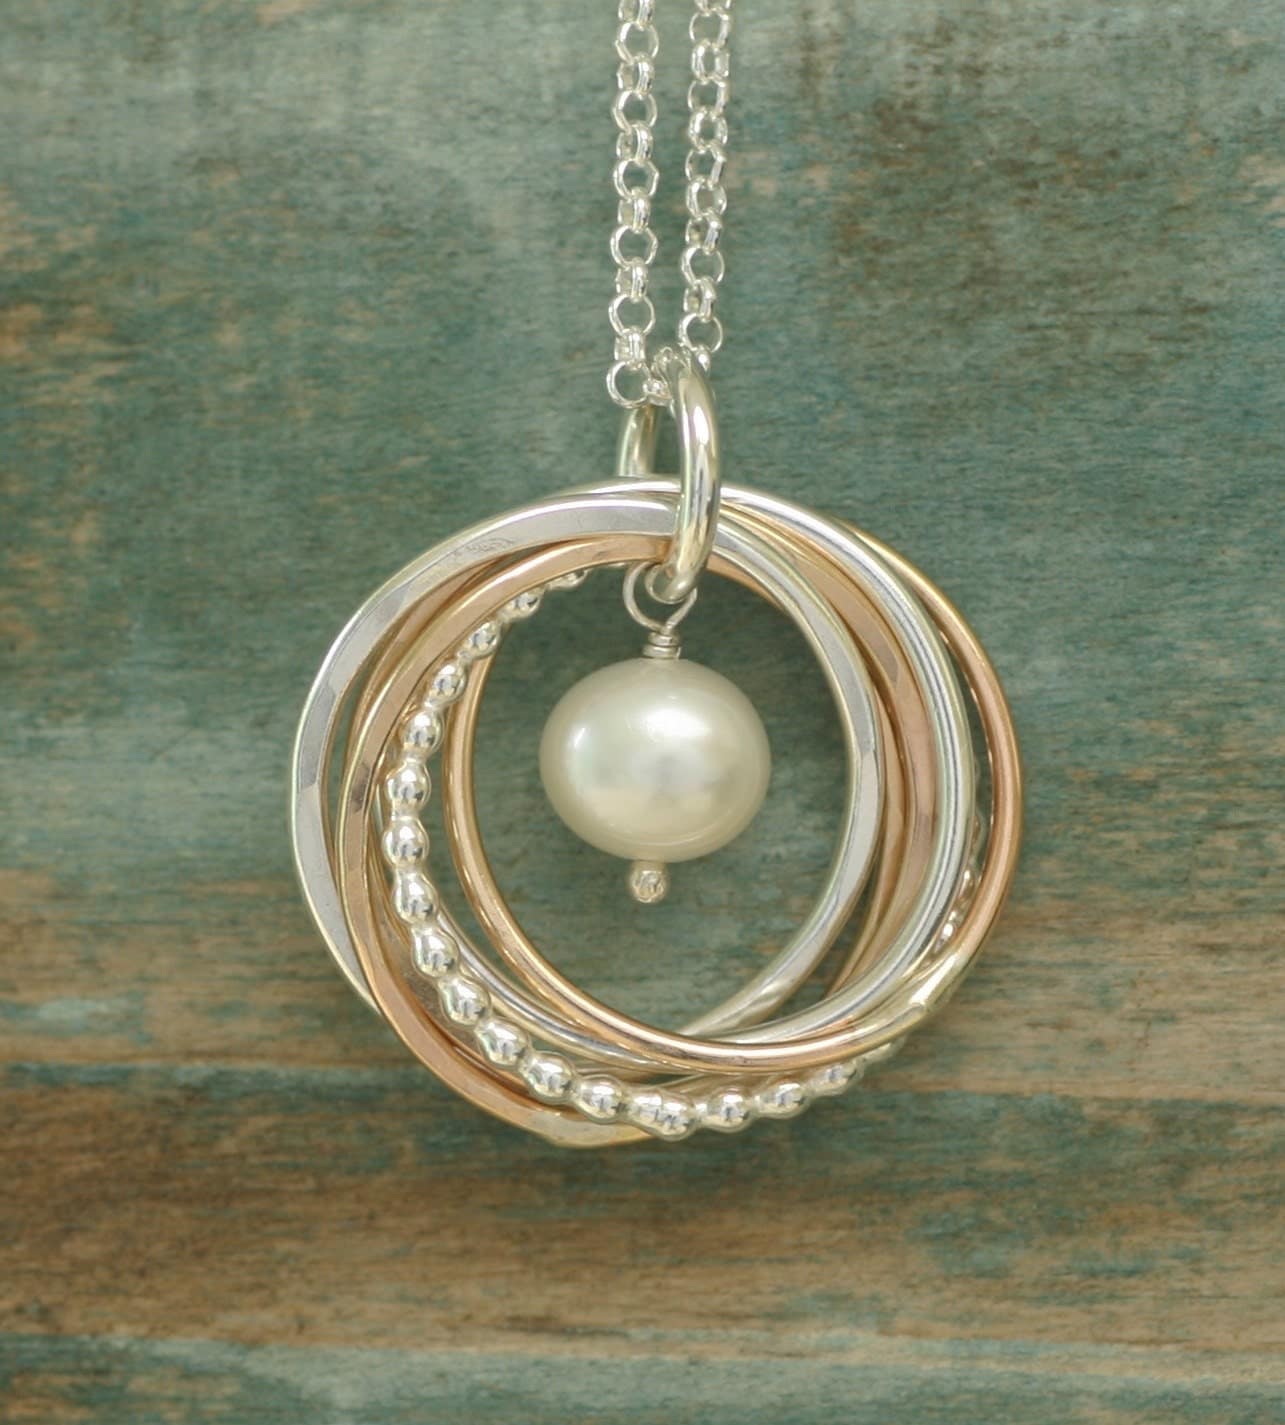 60th birthday gift pearl necklace 6 year anniversary gift